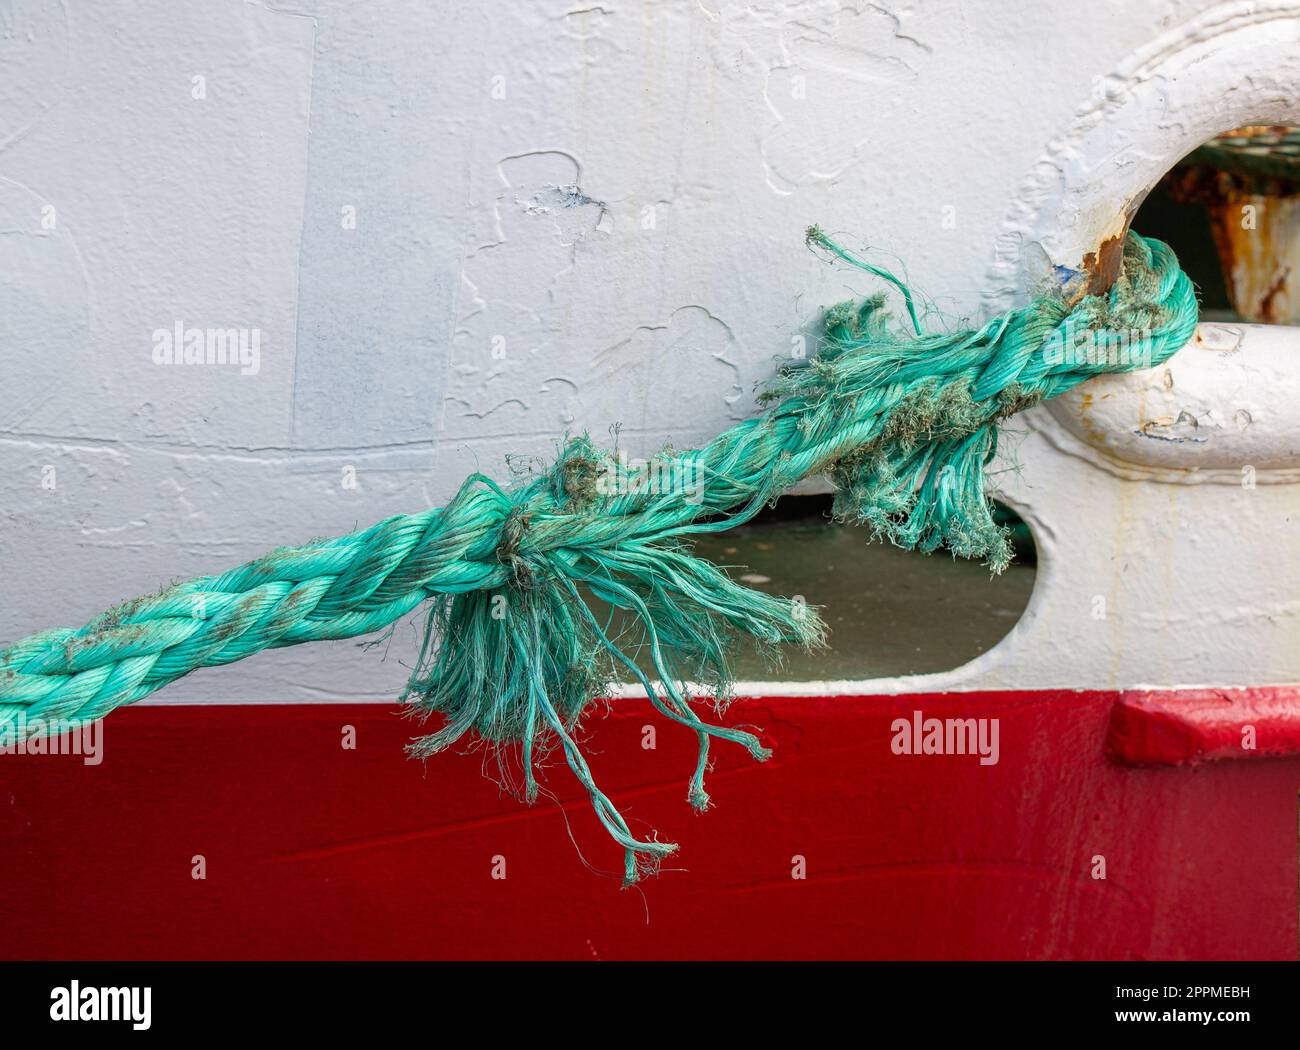 Badly frayed mooring line about to snap or part. Stock Photo